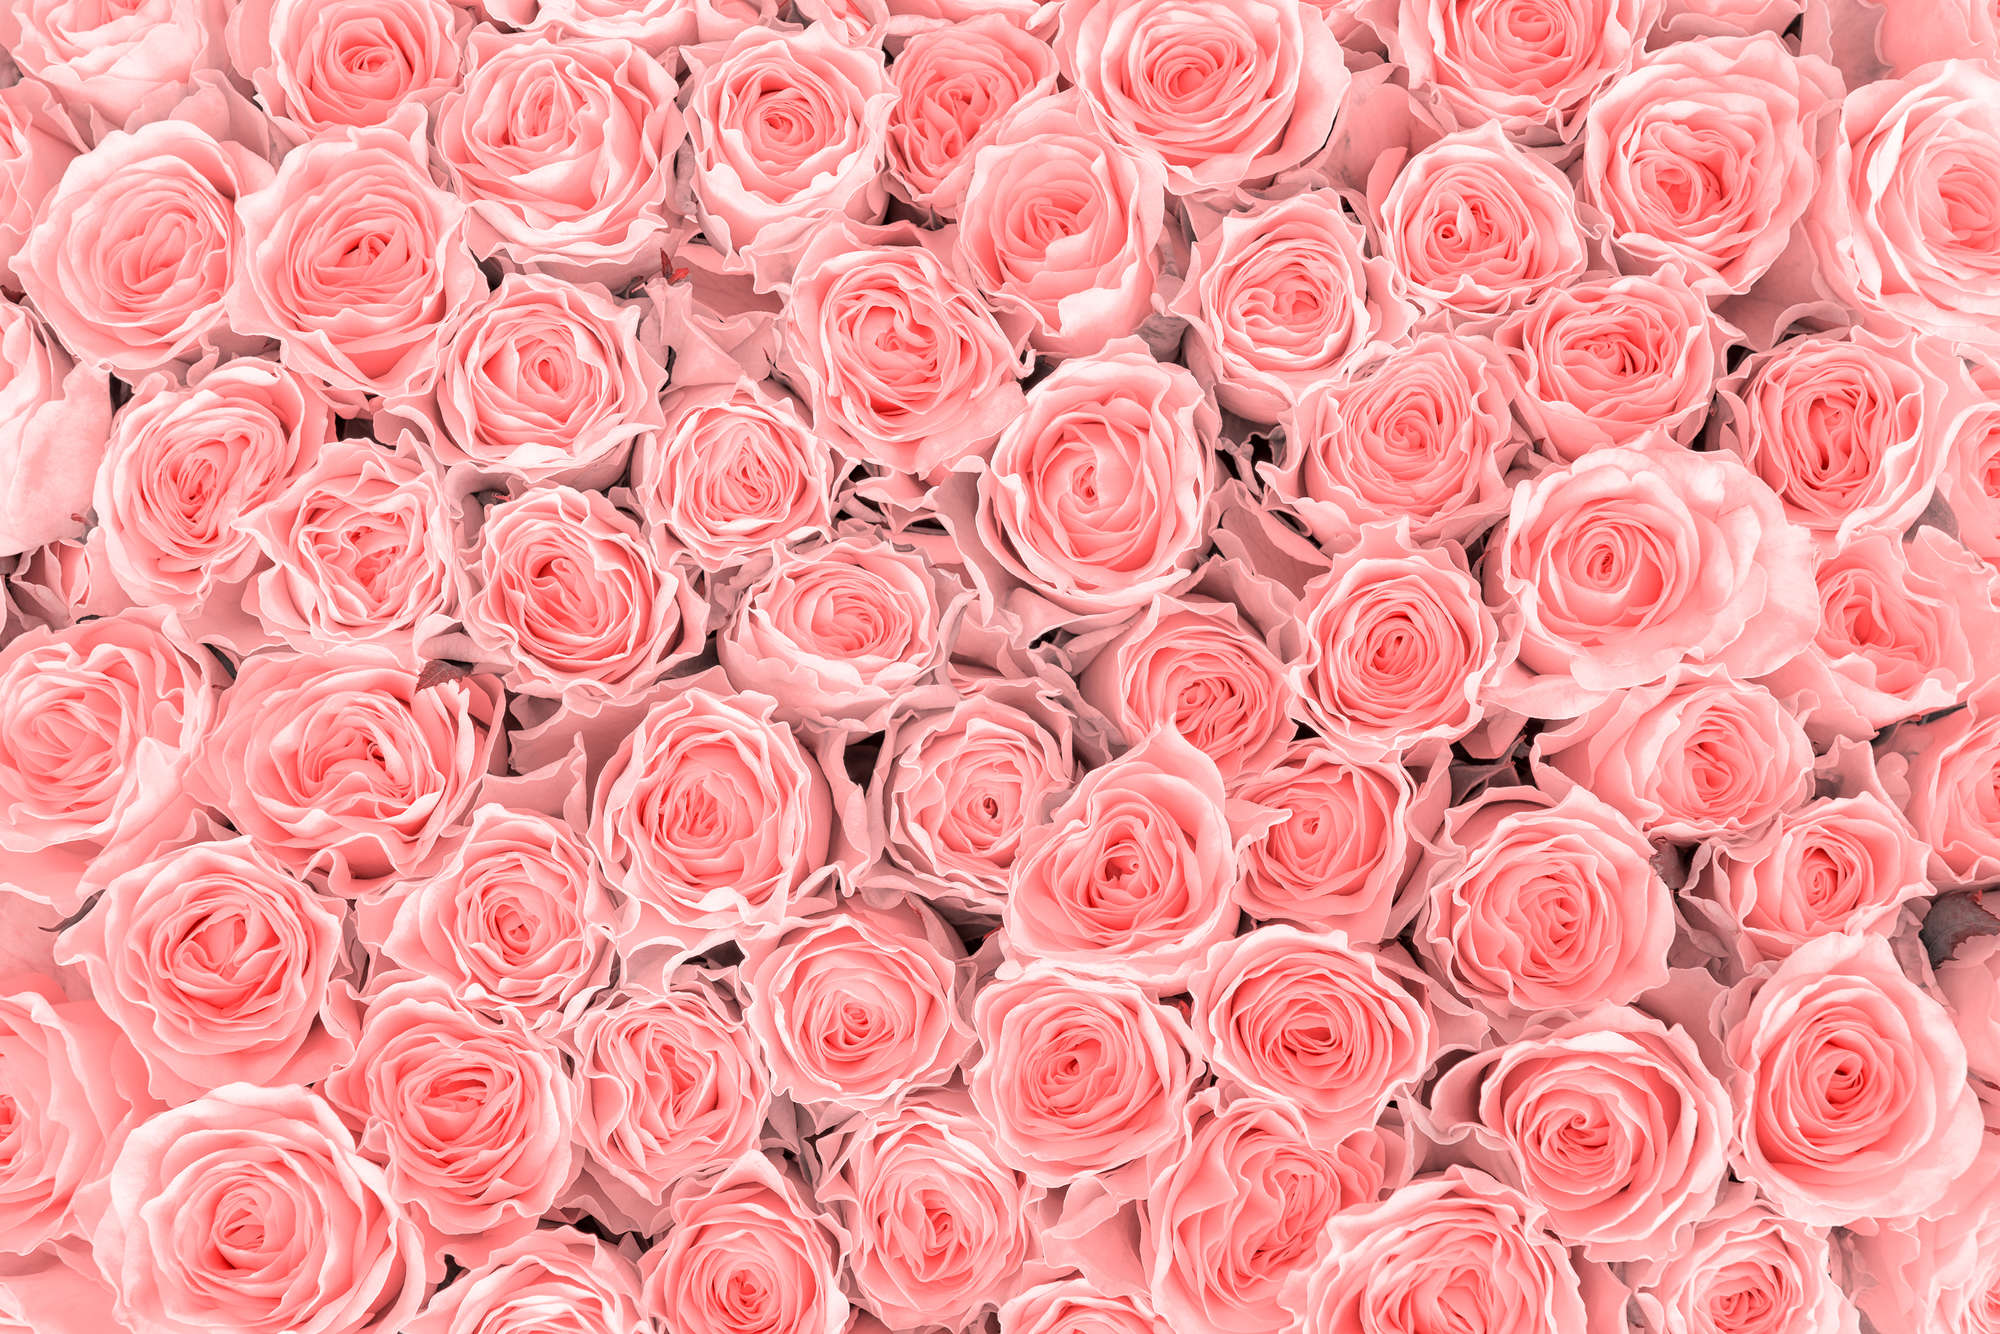             Plants mural pink roses on matt smooth non-woven
        